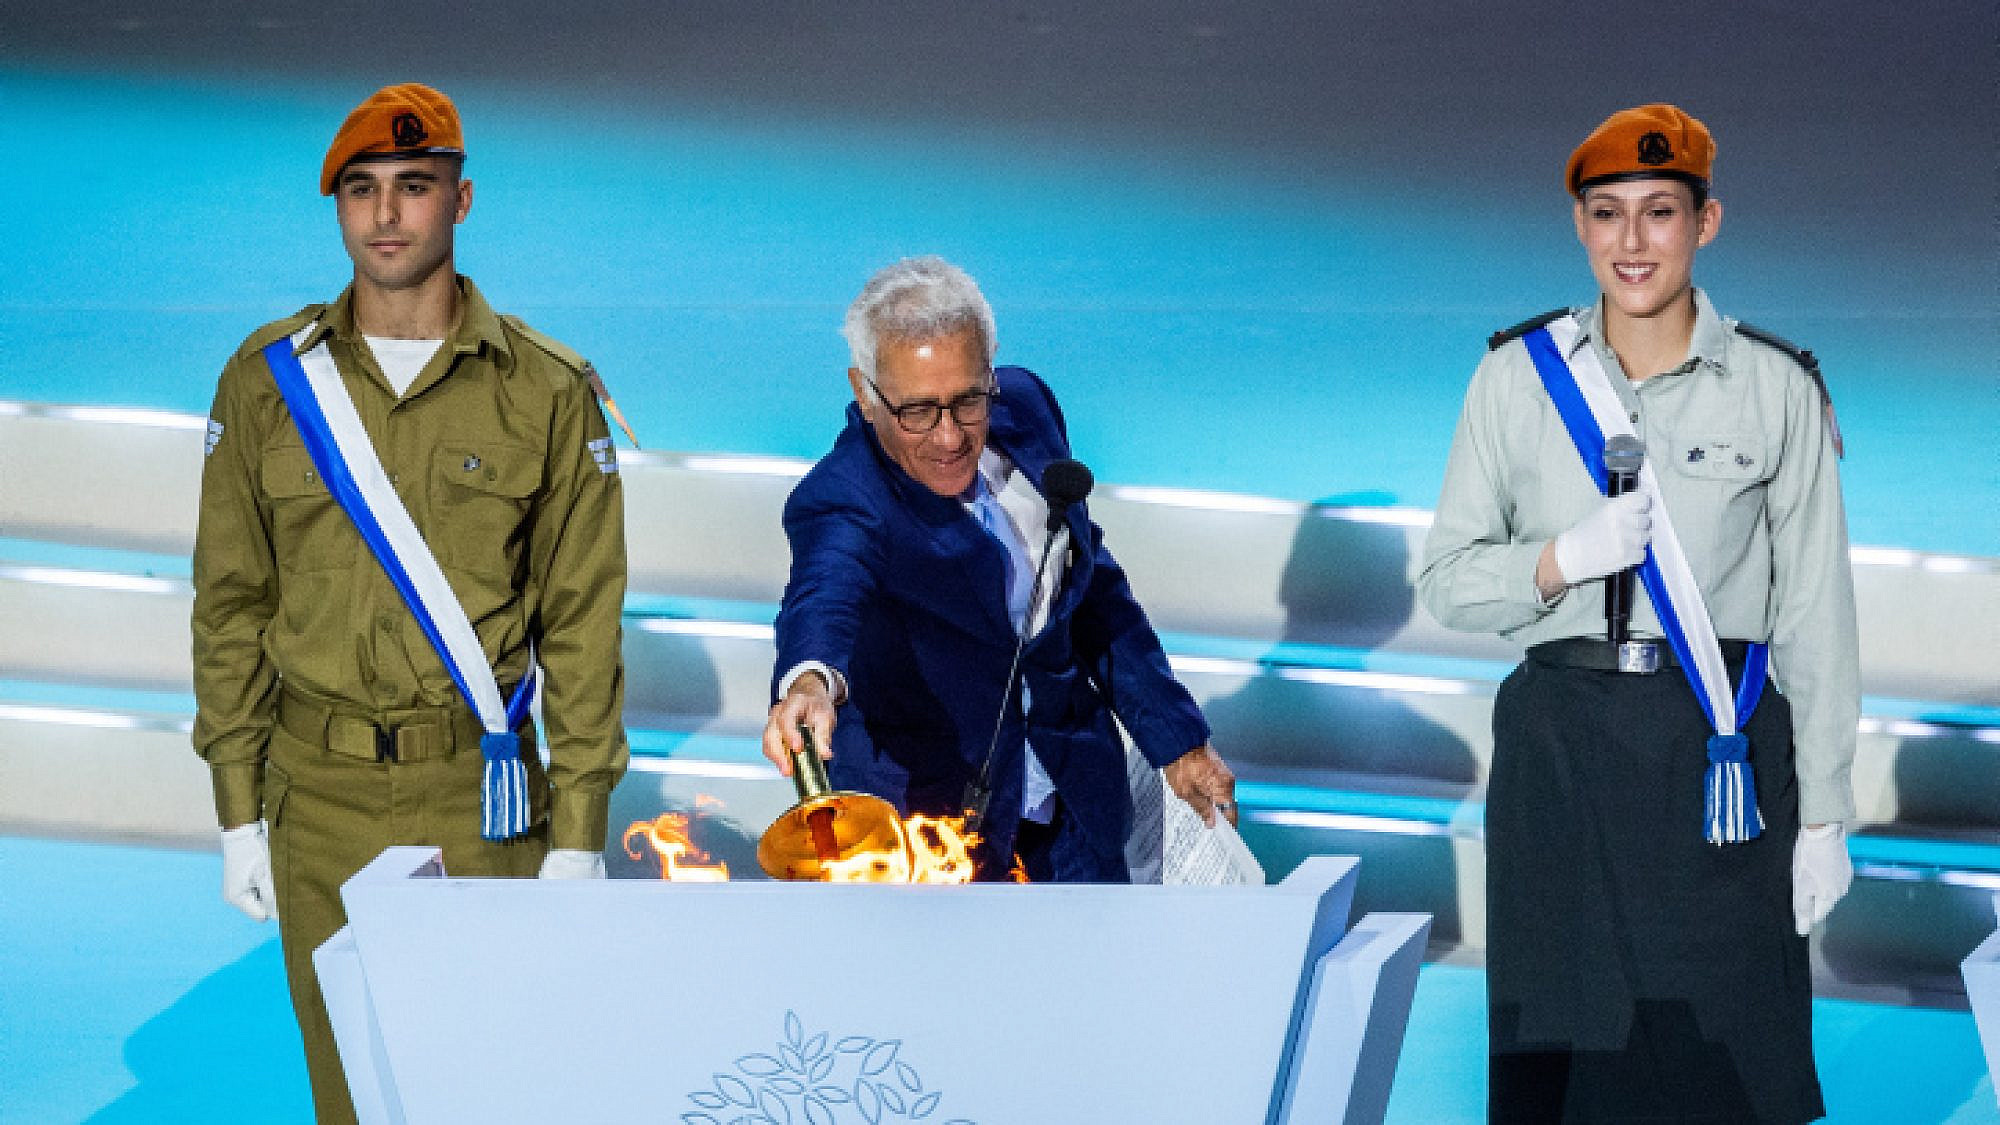 Sylvan Adams lights a torch during the rehearsal for the Independence Day ceremony at Mount Herzl in Jerusalem, April 23, 2023. Photo by Yonatan Sindel/Flash90.